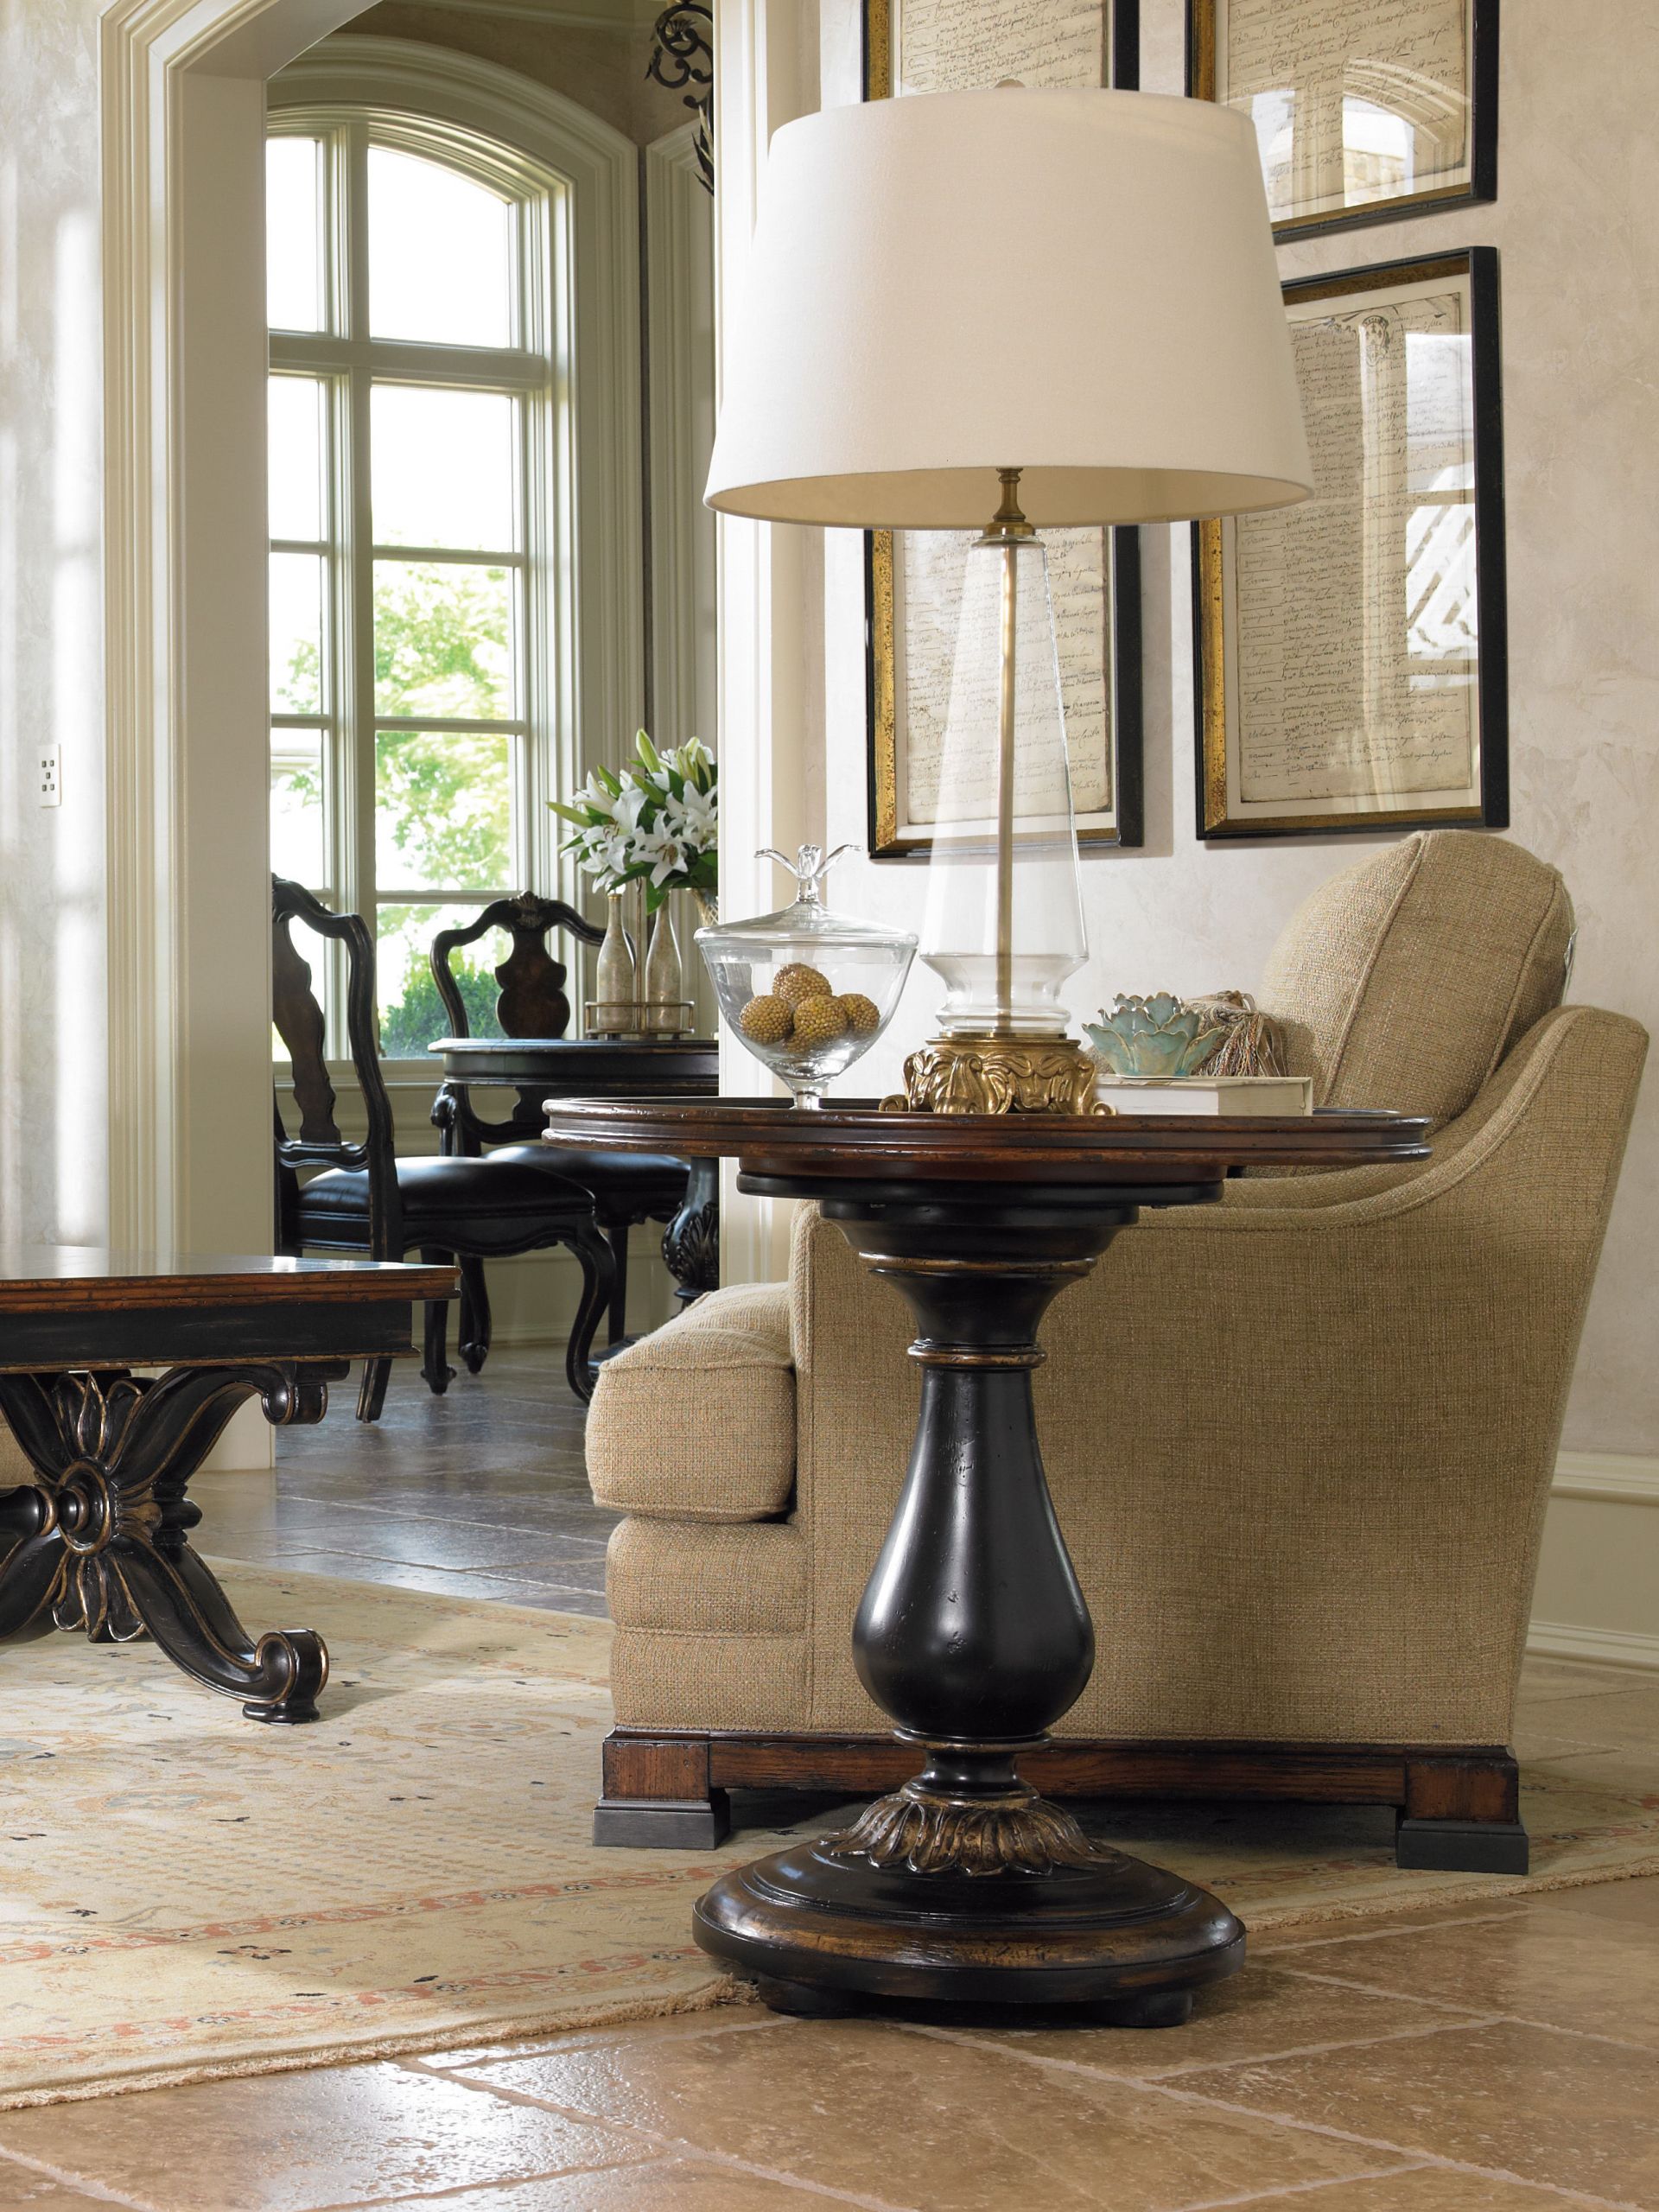 Accent Tables For Living Room
 Hooker Furniture Living Room Grandover Round Accent Table